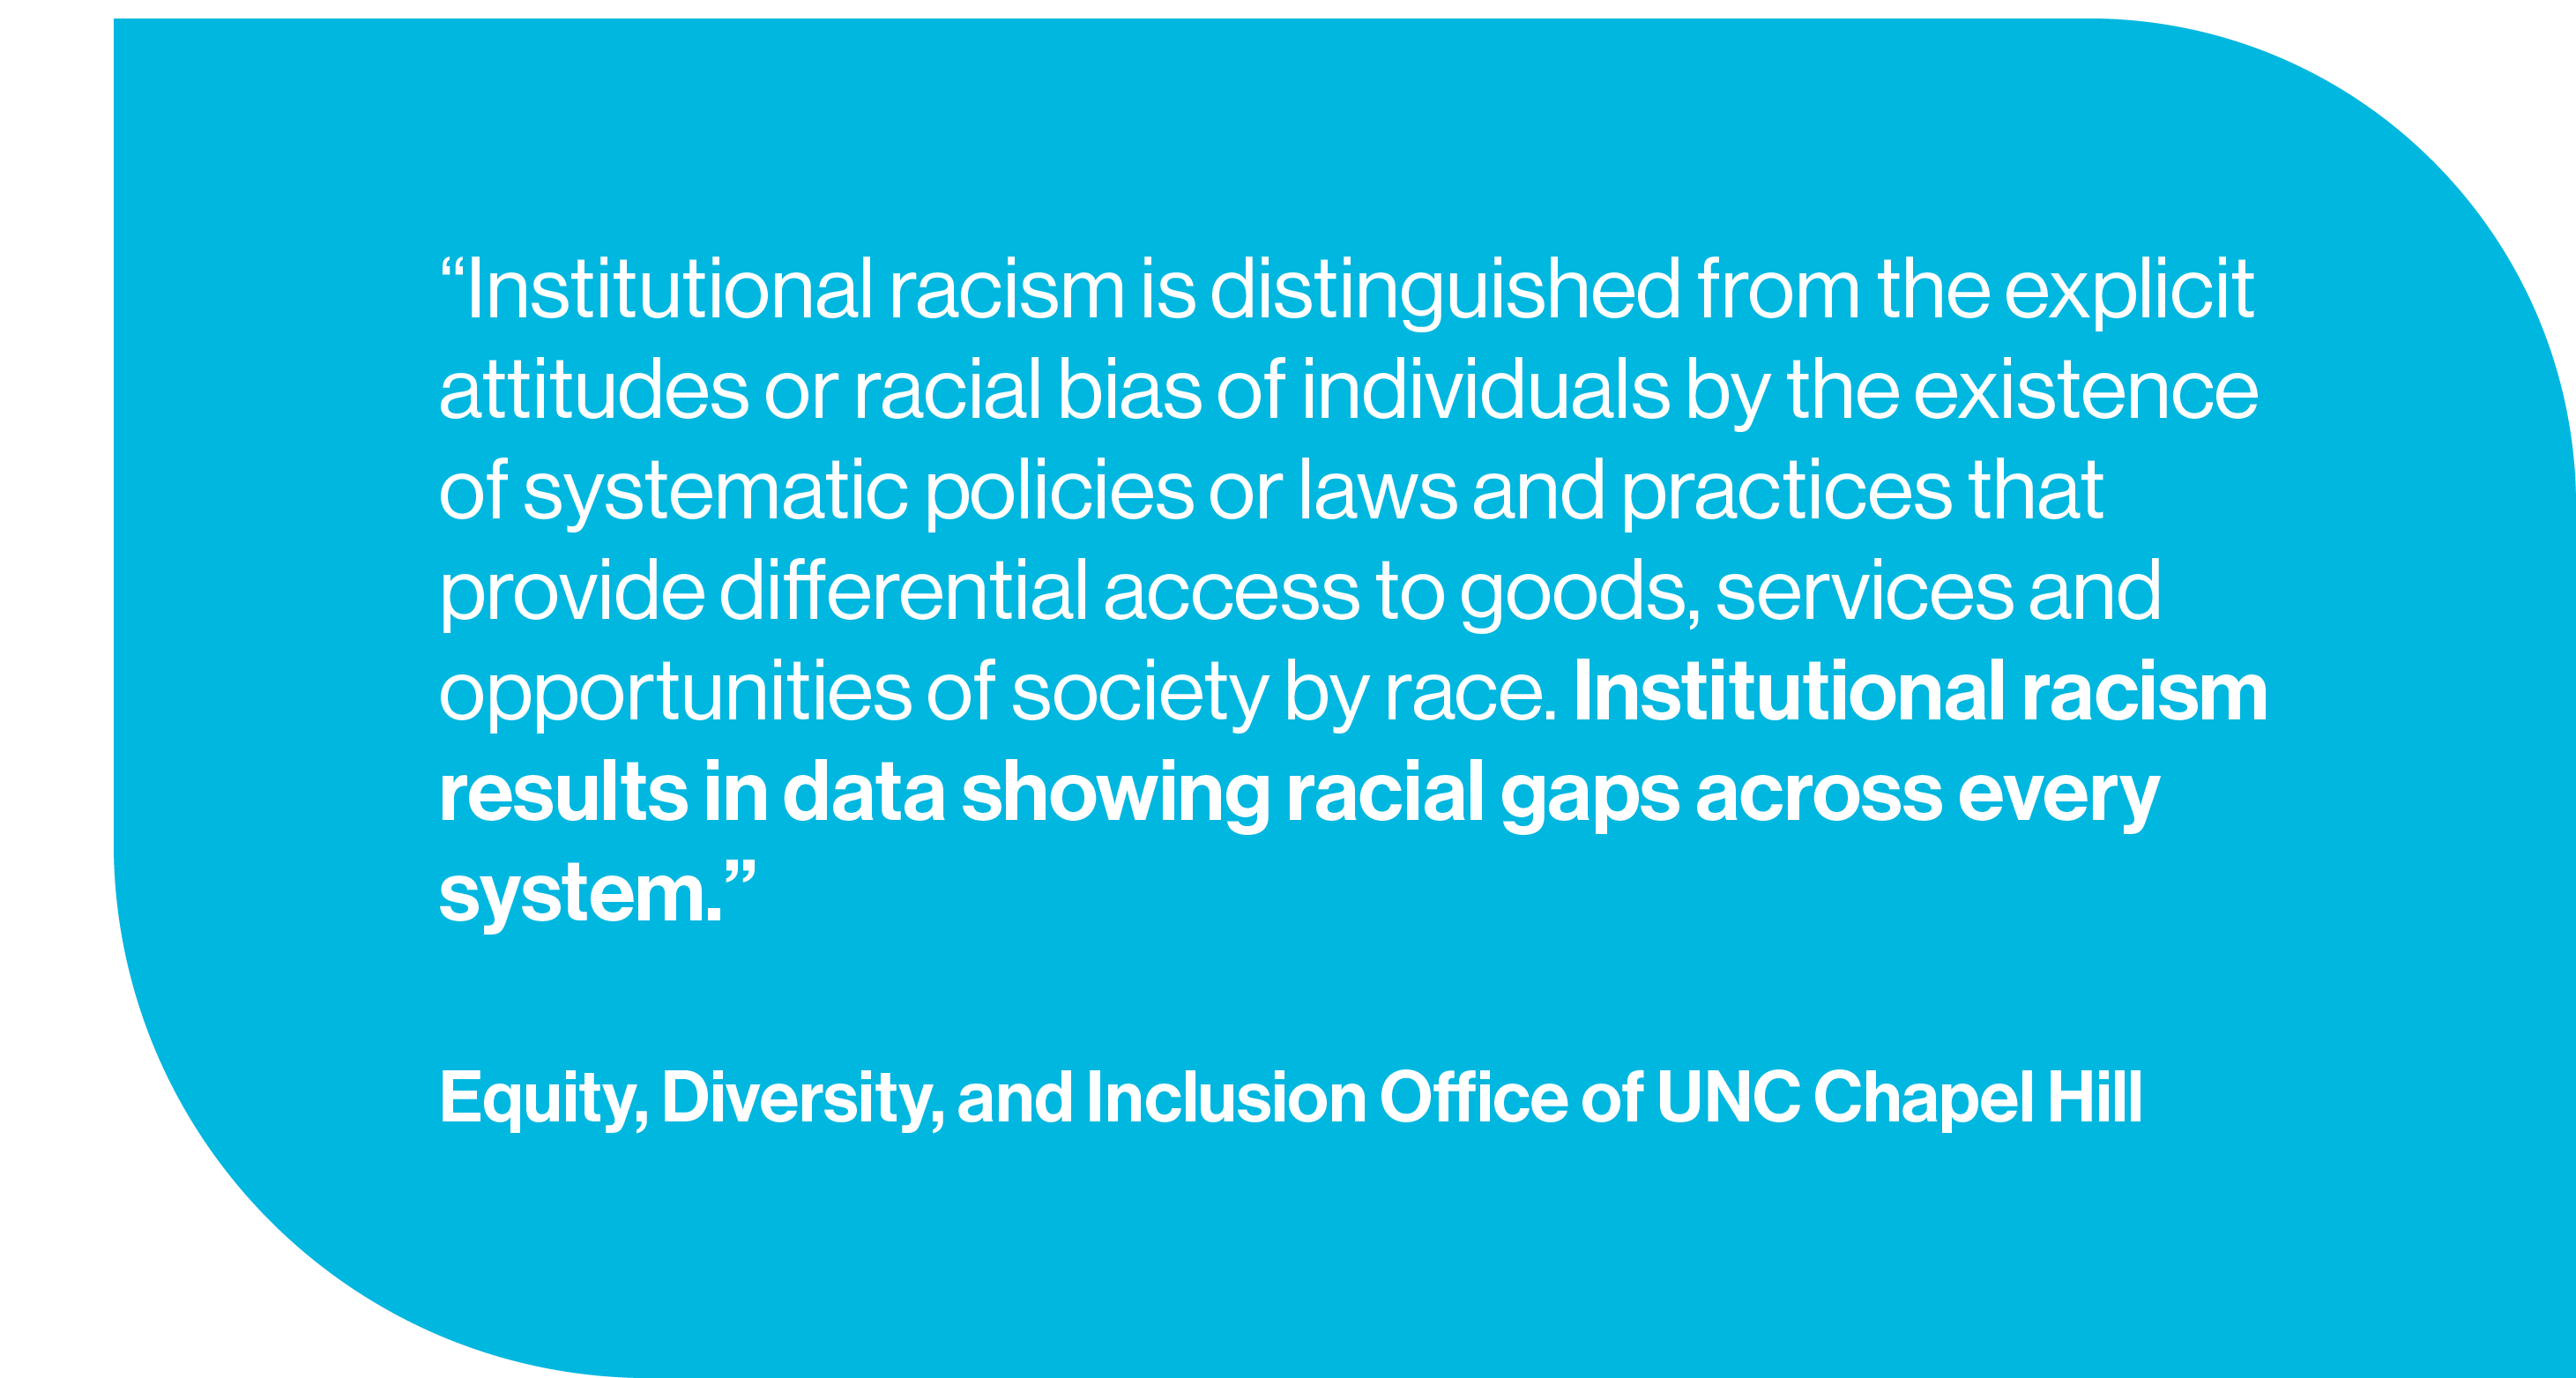 Institutional racism is distinguished from the explicit attitudes or racial bias of individuals by the existence of systematic policies or laws and practices that provide differential access to goods, services and opportunities of society by race. Institutional racism results in data showing racial gaps across every system.